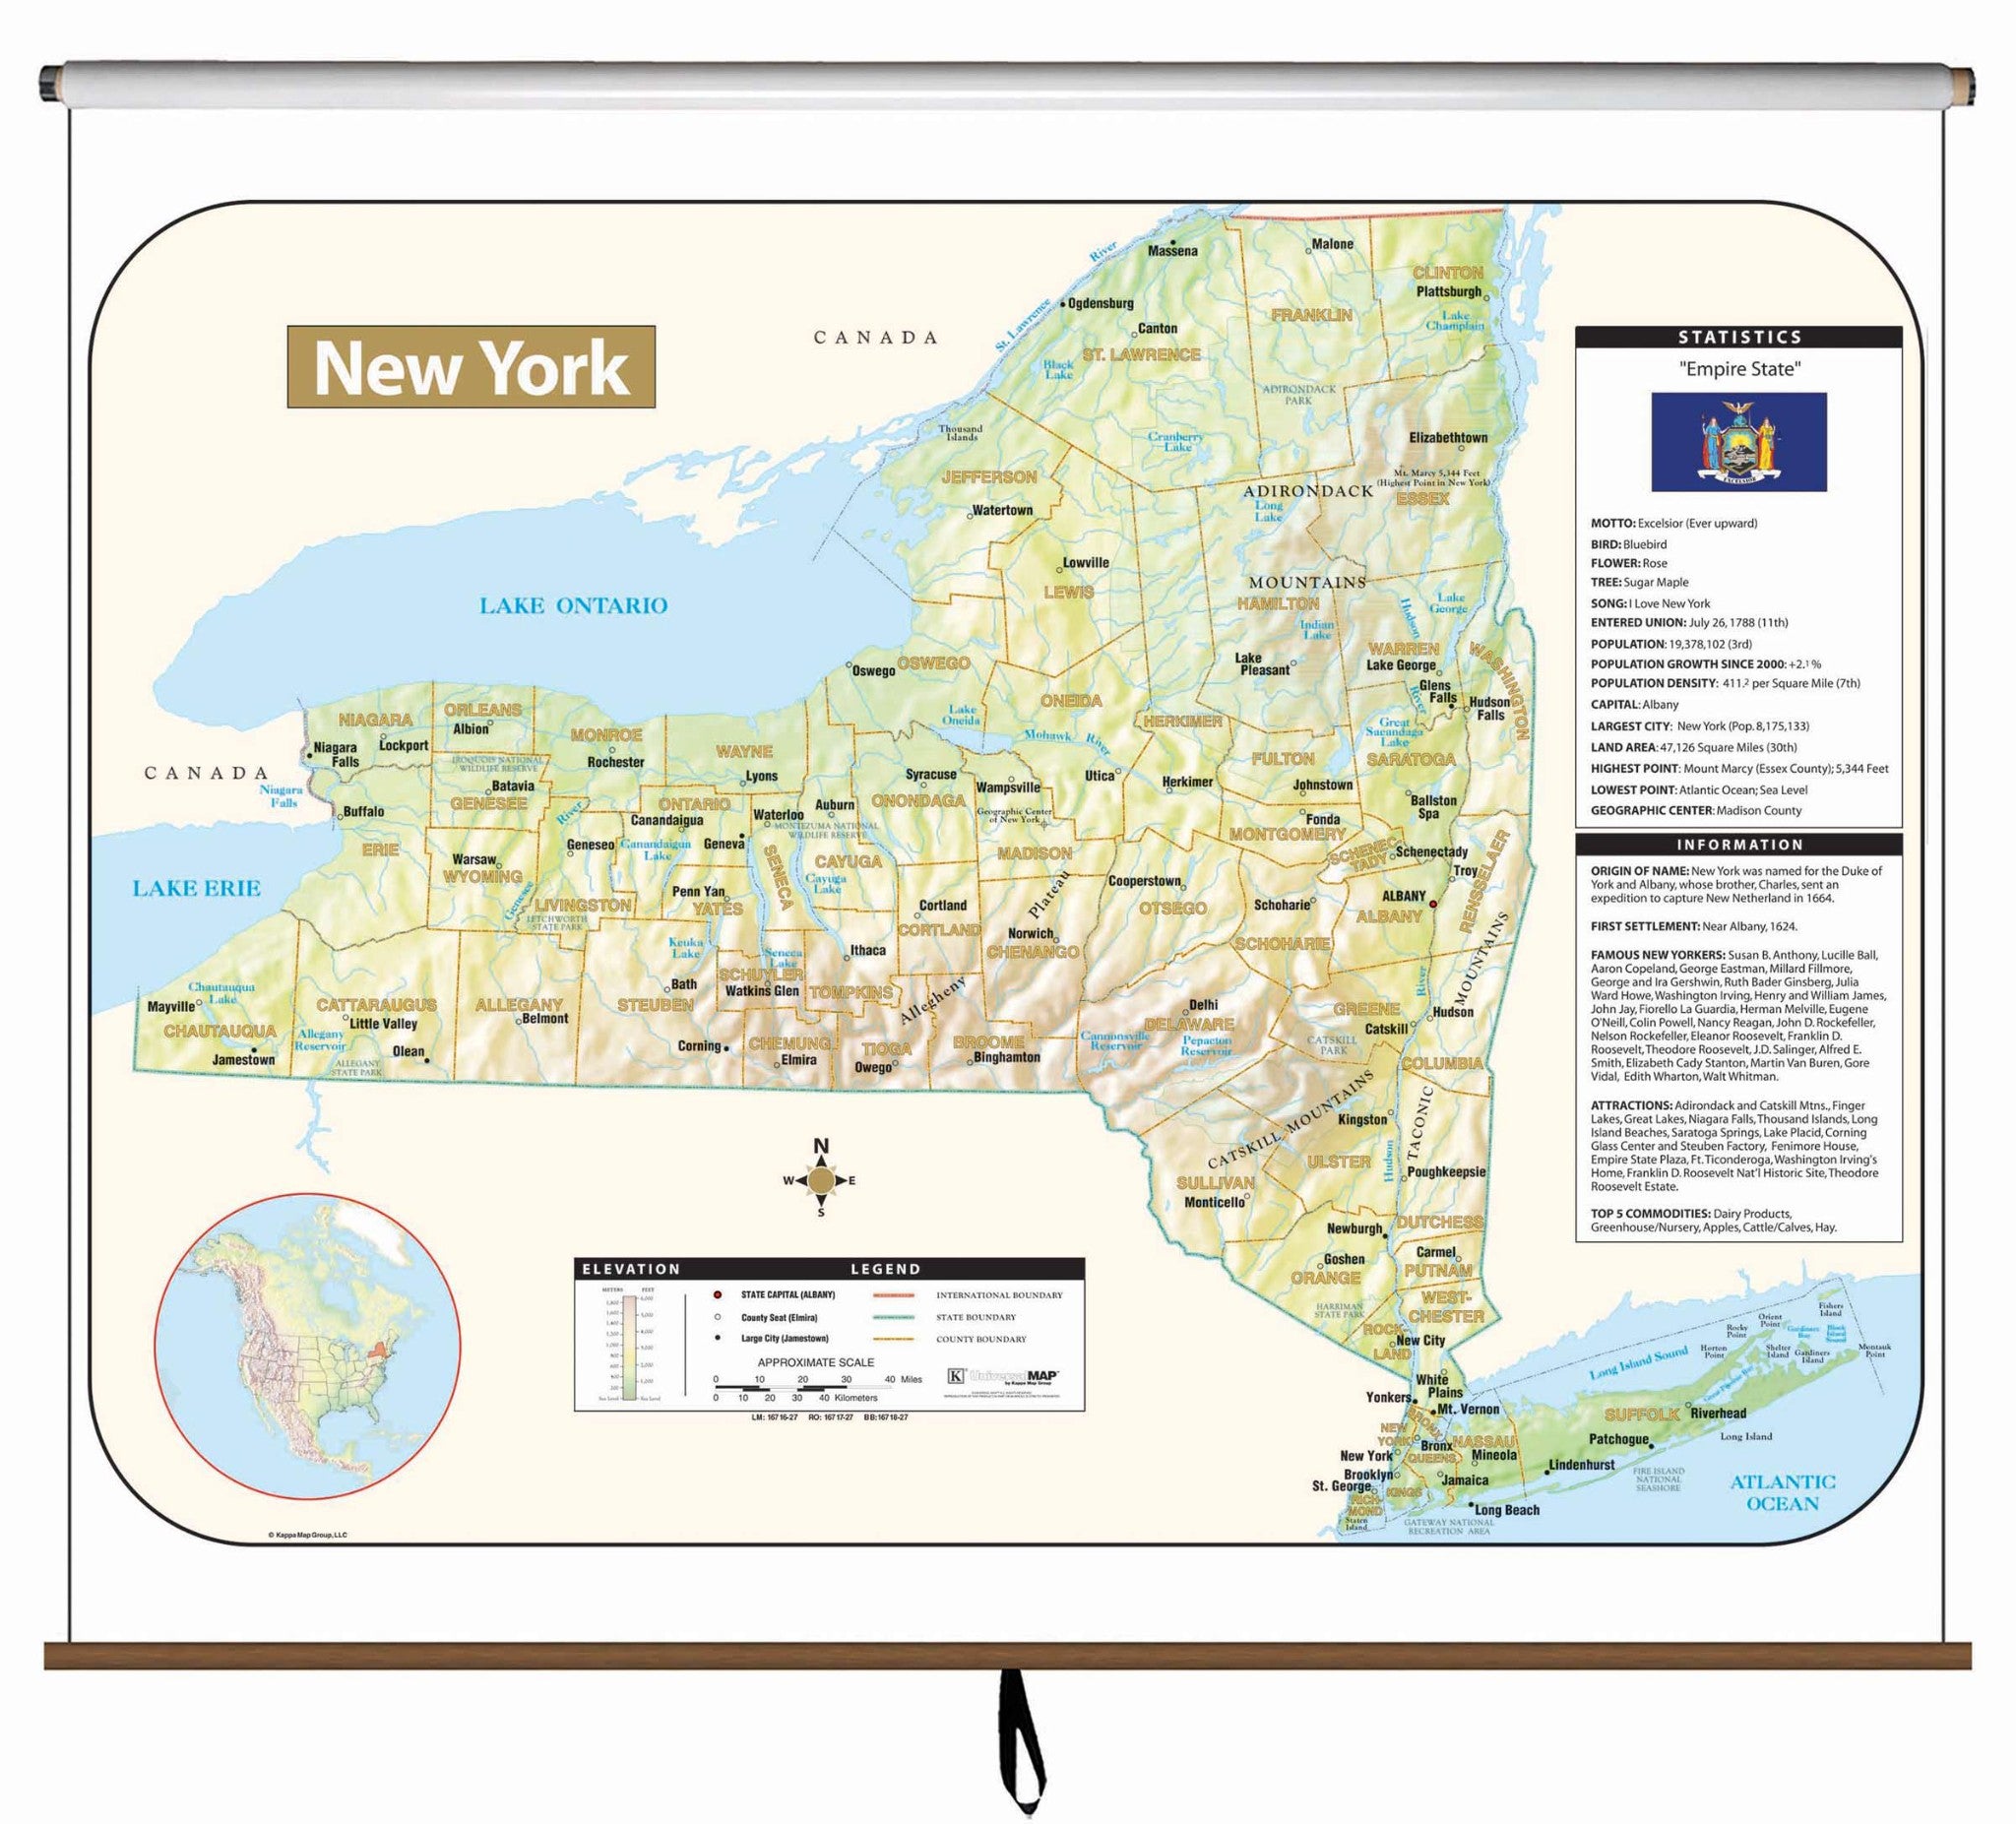 Kappa Map Group  New York Large Scale Shaded Relief Wall Map